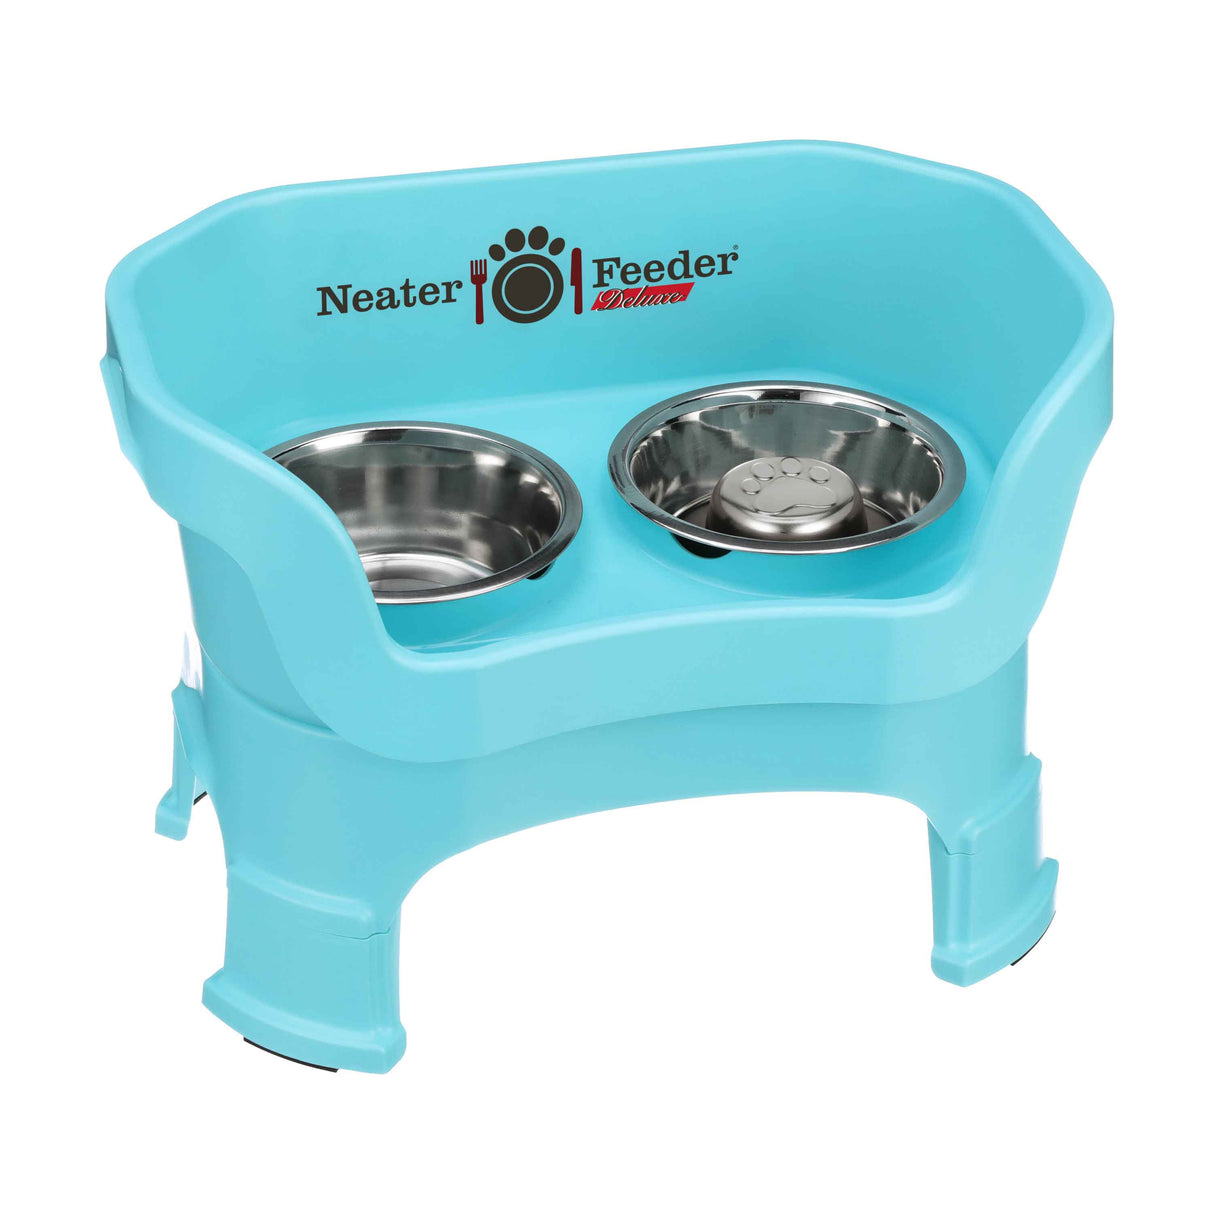 Aquamarine medium DELUXE Neater Feeder with Stainless Steel Slow Feed Bowl with leg extensions